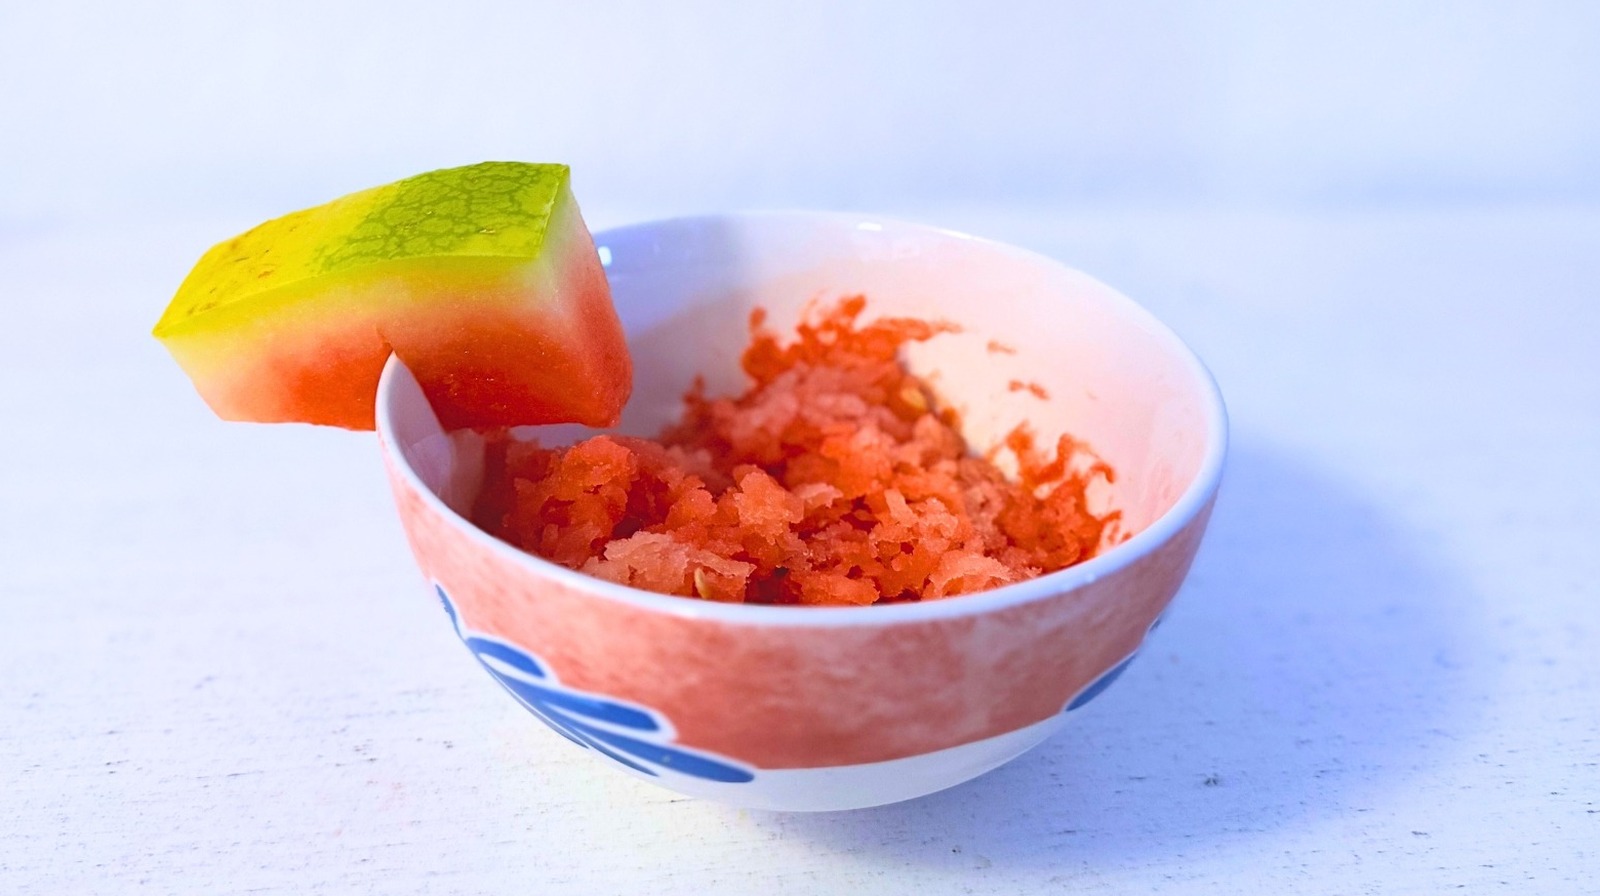 Freeze And Grate Watermelon To Make Delicious Shaved Ice